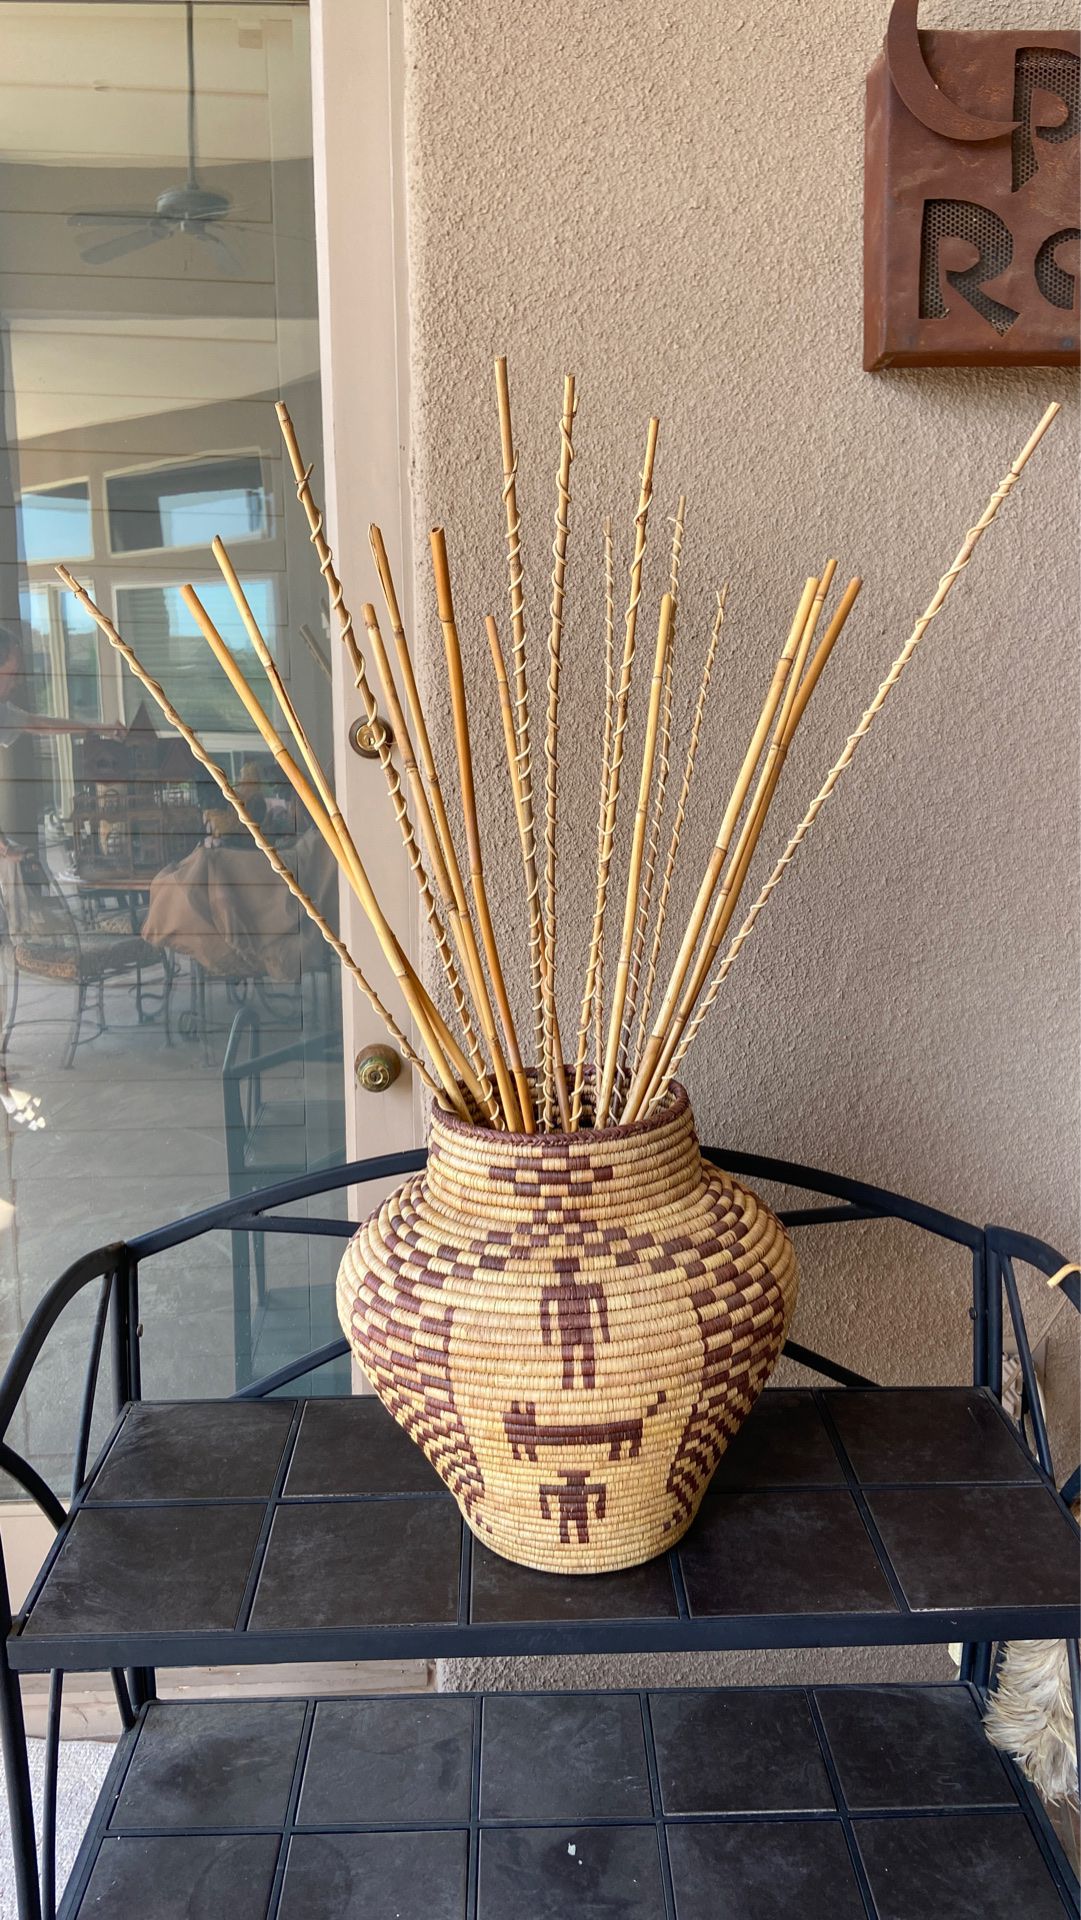 Santa Fe Woven basket purchased at the Indian market in Phoenix must pick up